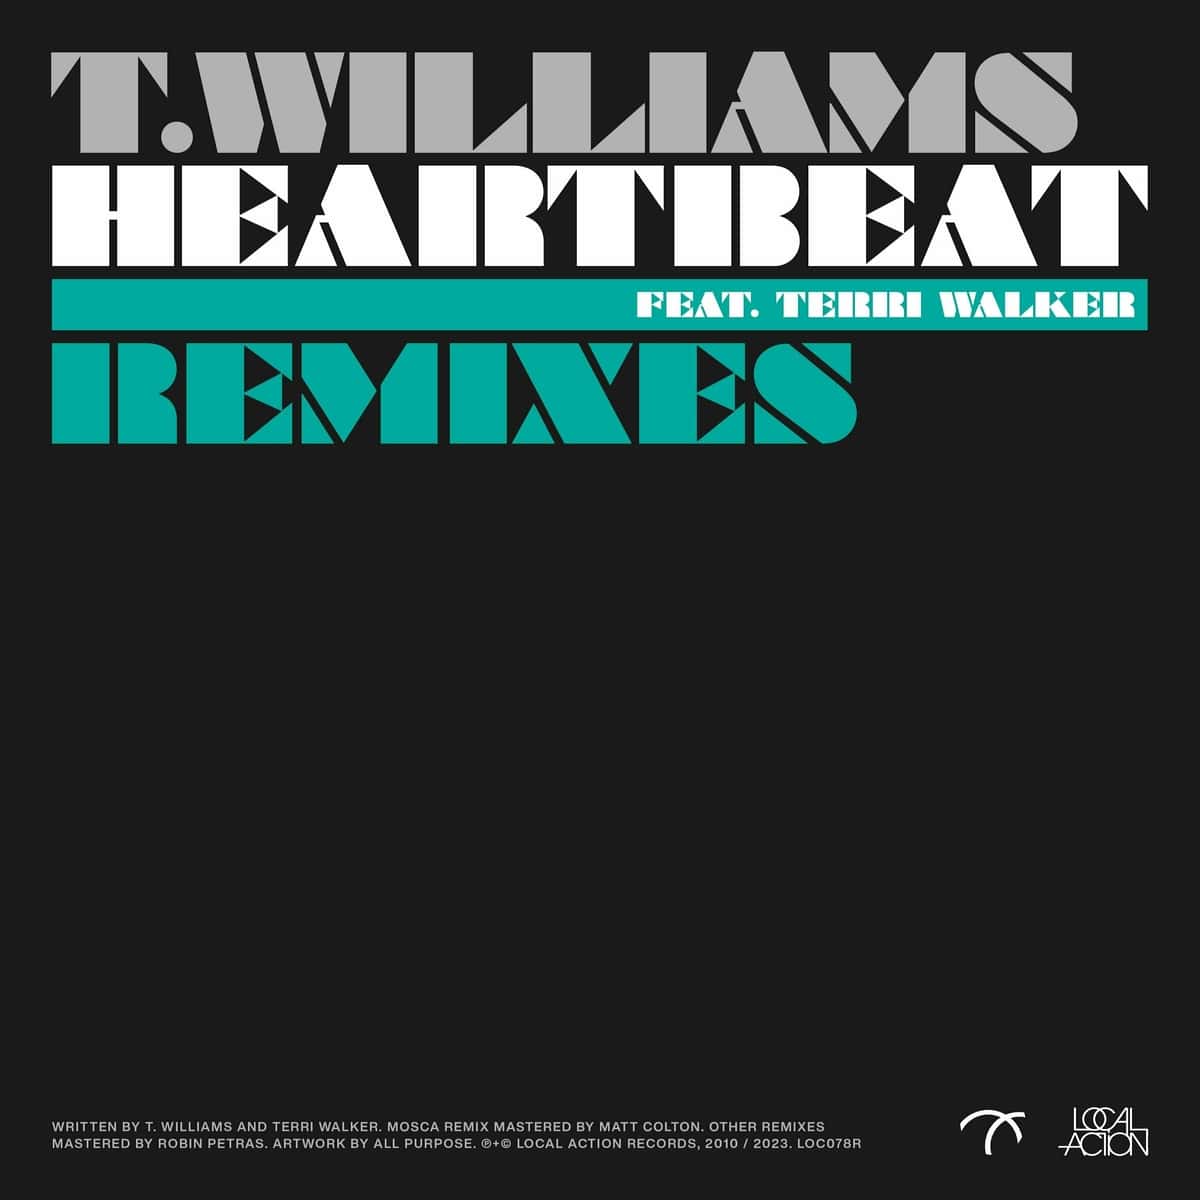 image cover: T. Williams - Heartbeat (Remixes) on